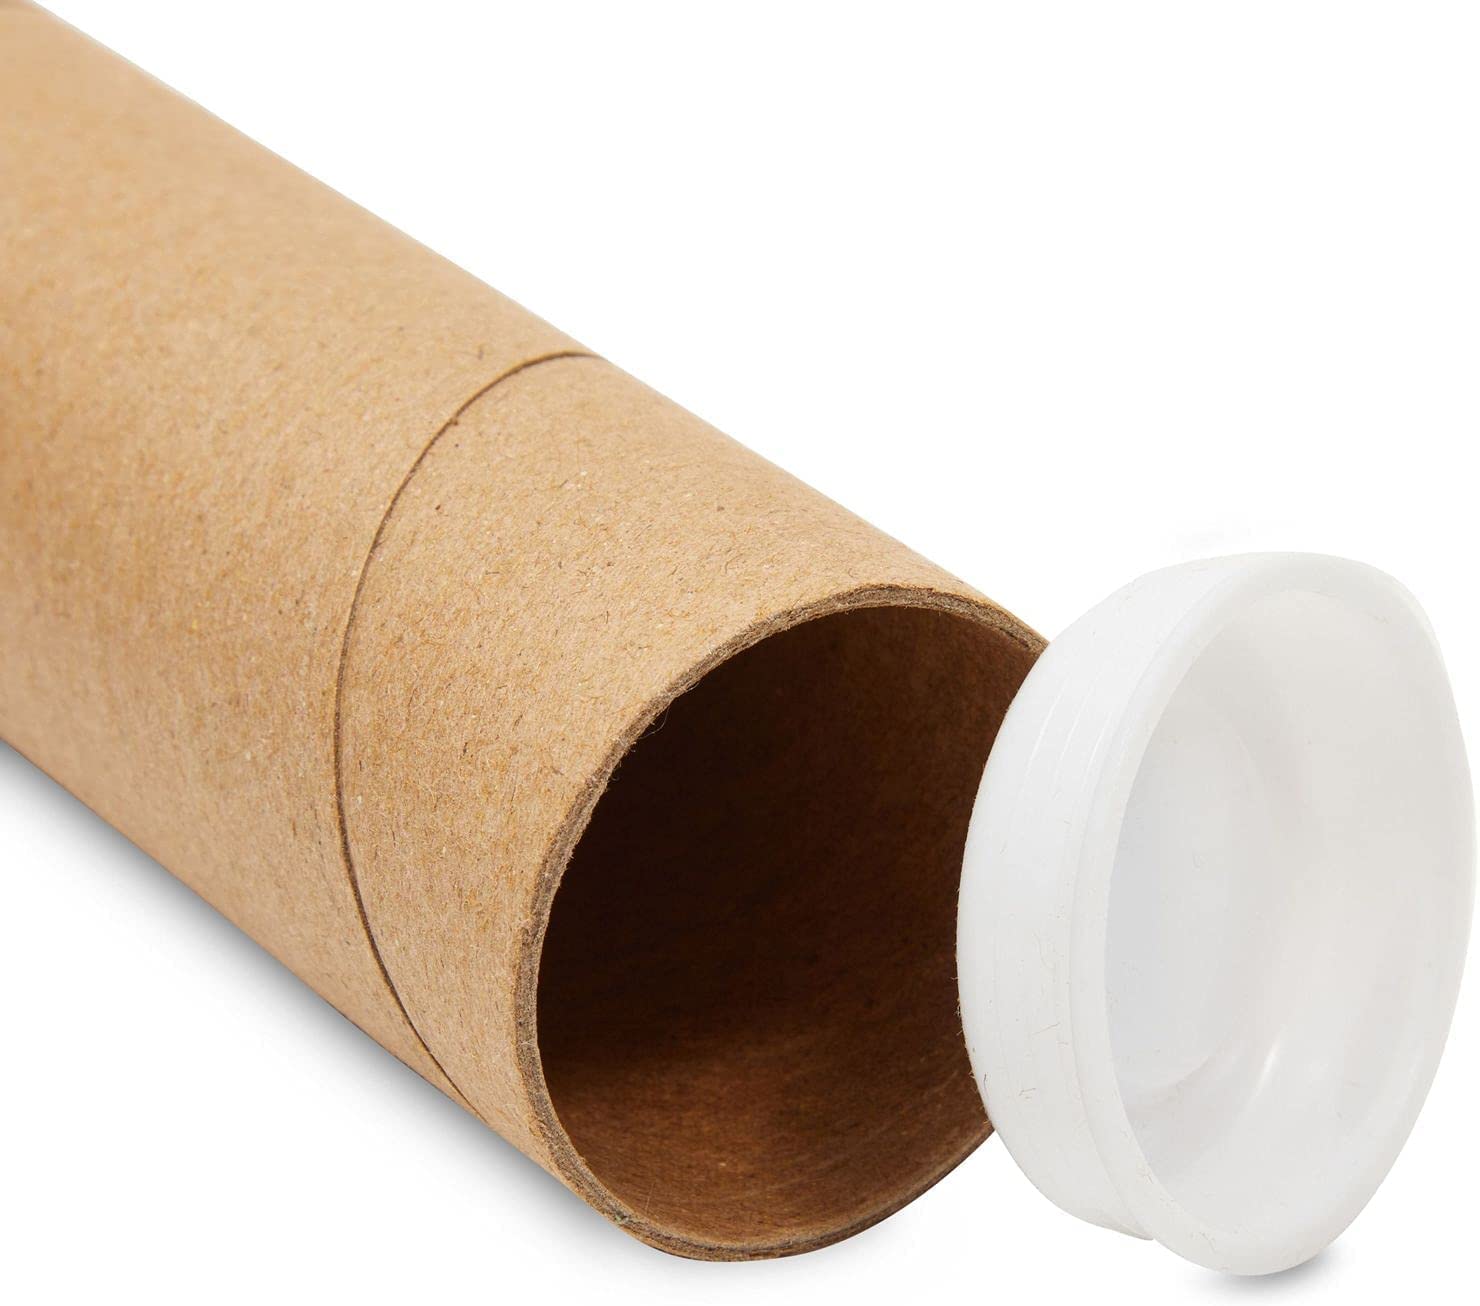 IMPRINT Tube mailers 18 Inch Long and 2 Inch in Diameter, Pack of 2, Tubes  Colour Brown